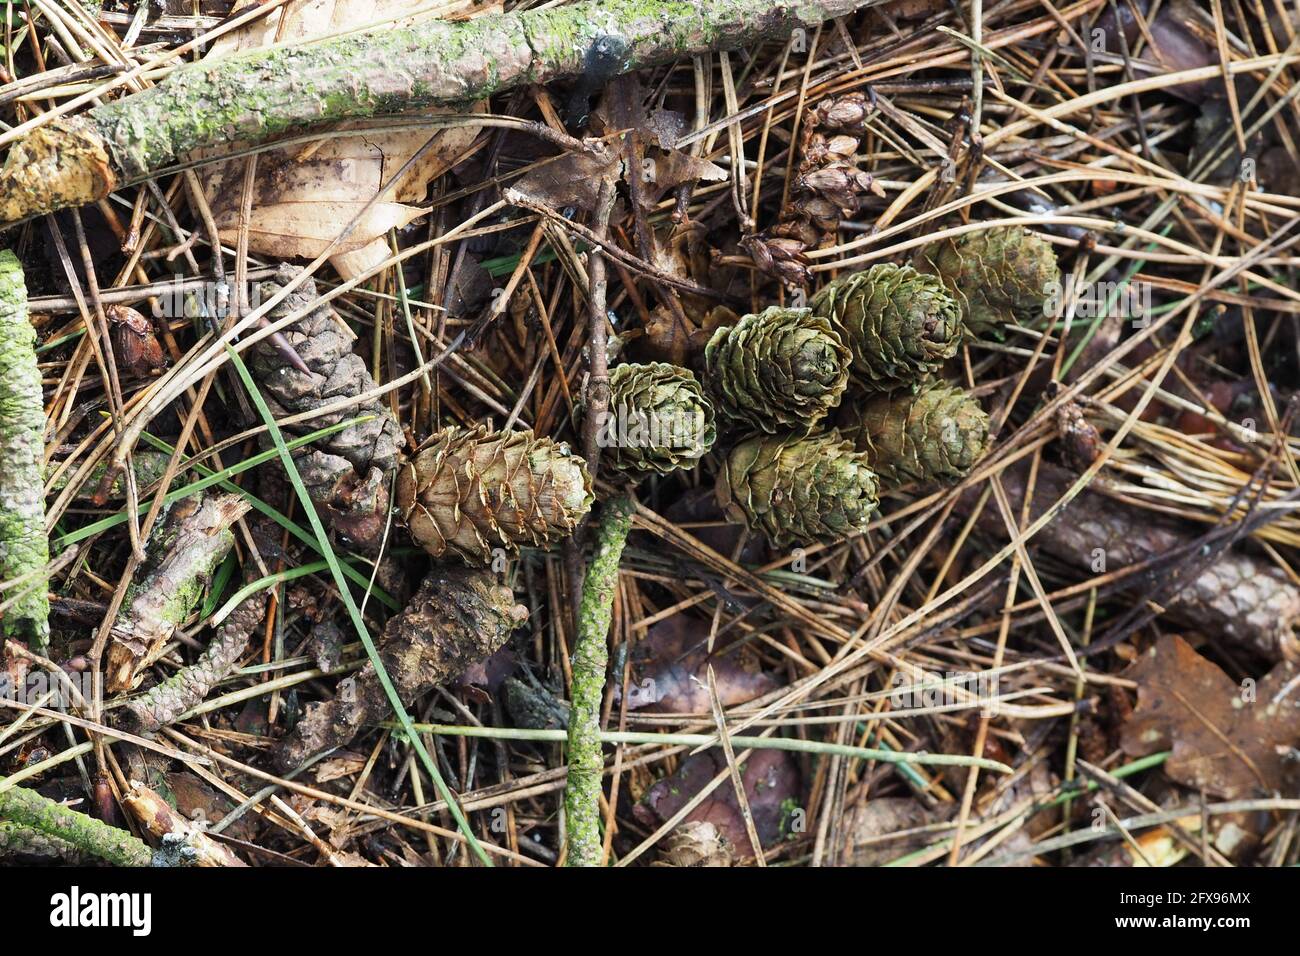 Forest floor covering in Autumn with pine cones Stock Photo